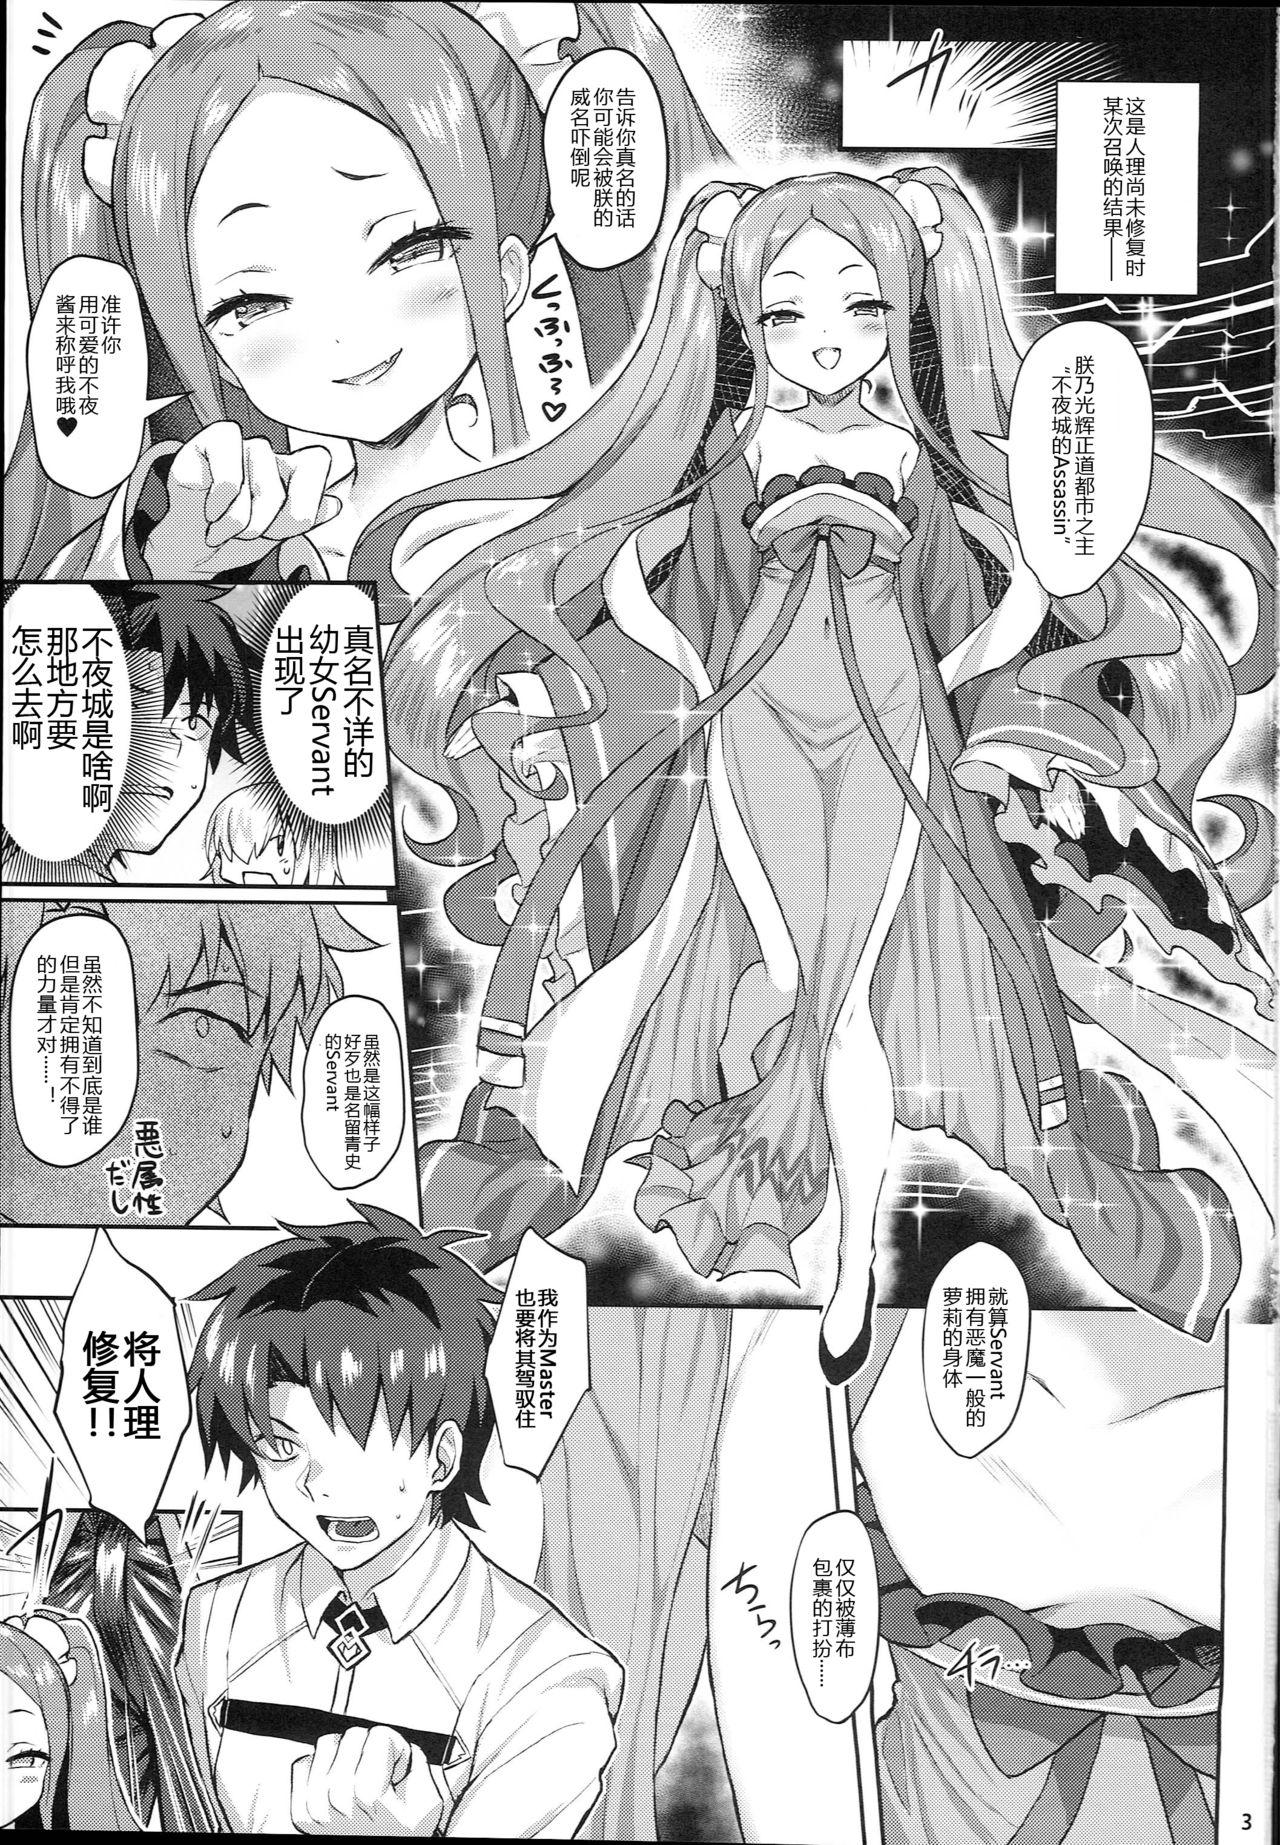 Young Men Fuya Syndrome - Sleepless Syndrome - Fate grand order Euro - Page 4